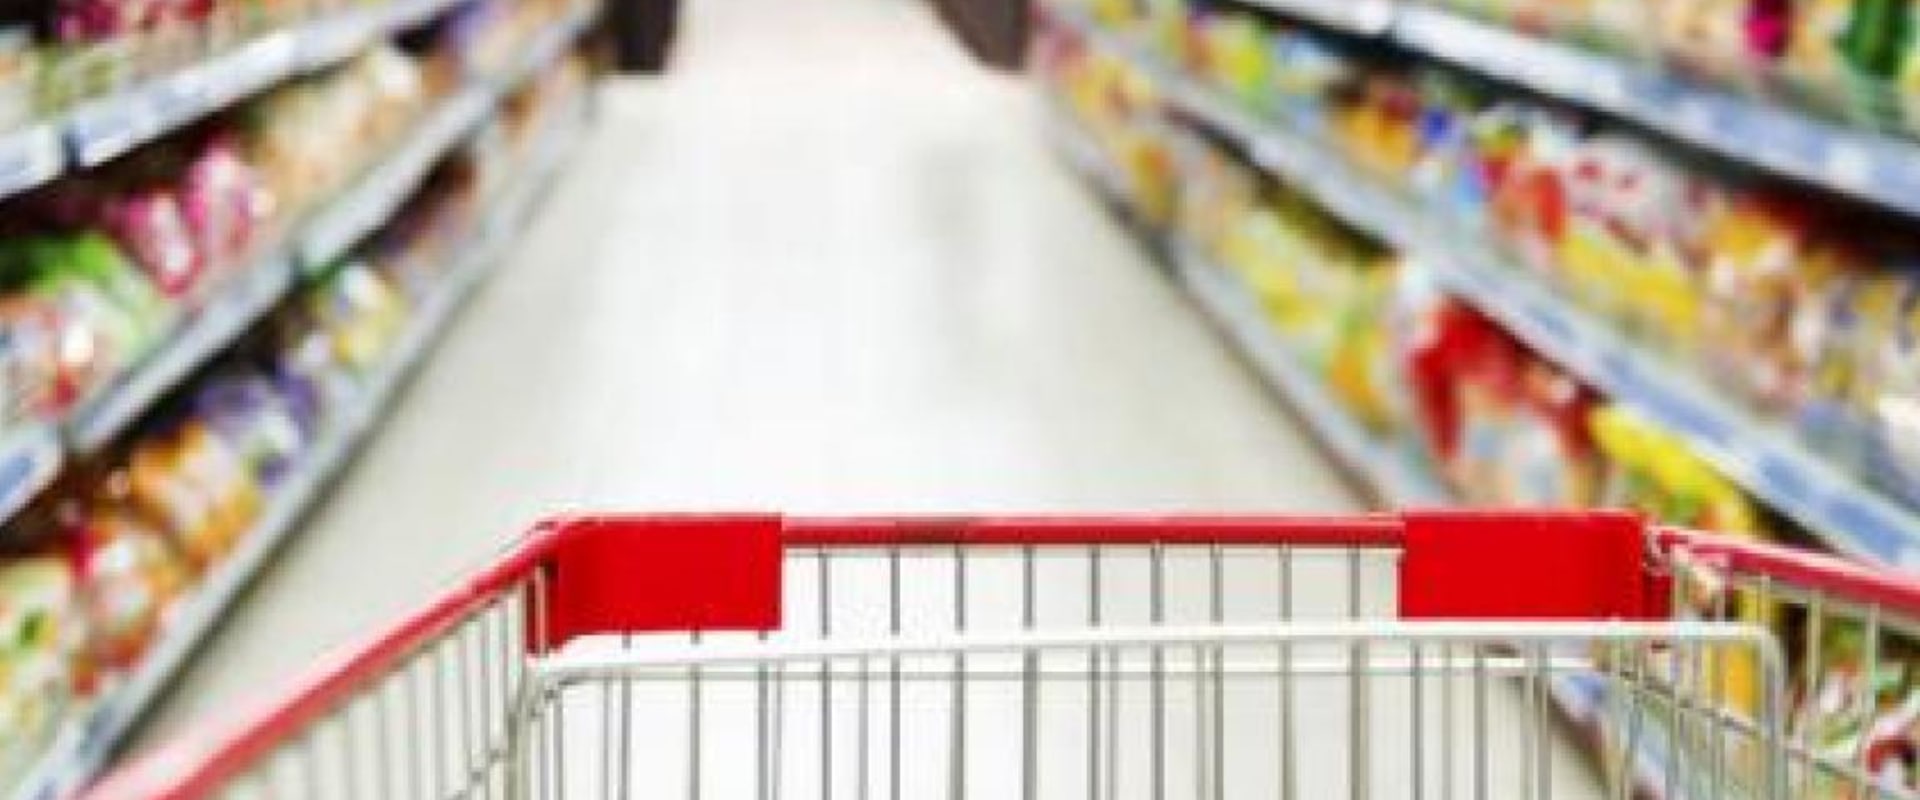 19 Things You Should Avoid Buying at the Supermarket